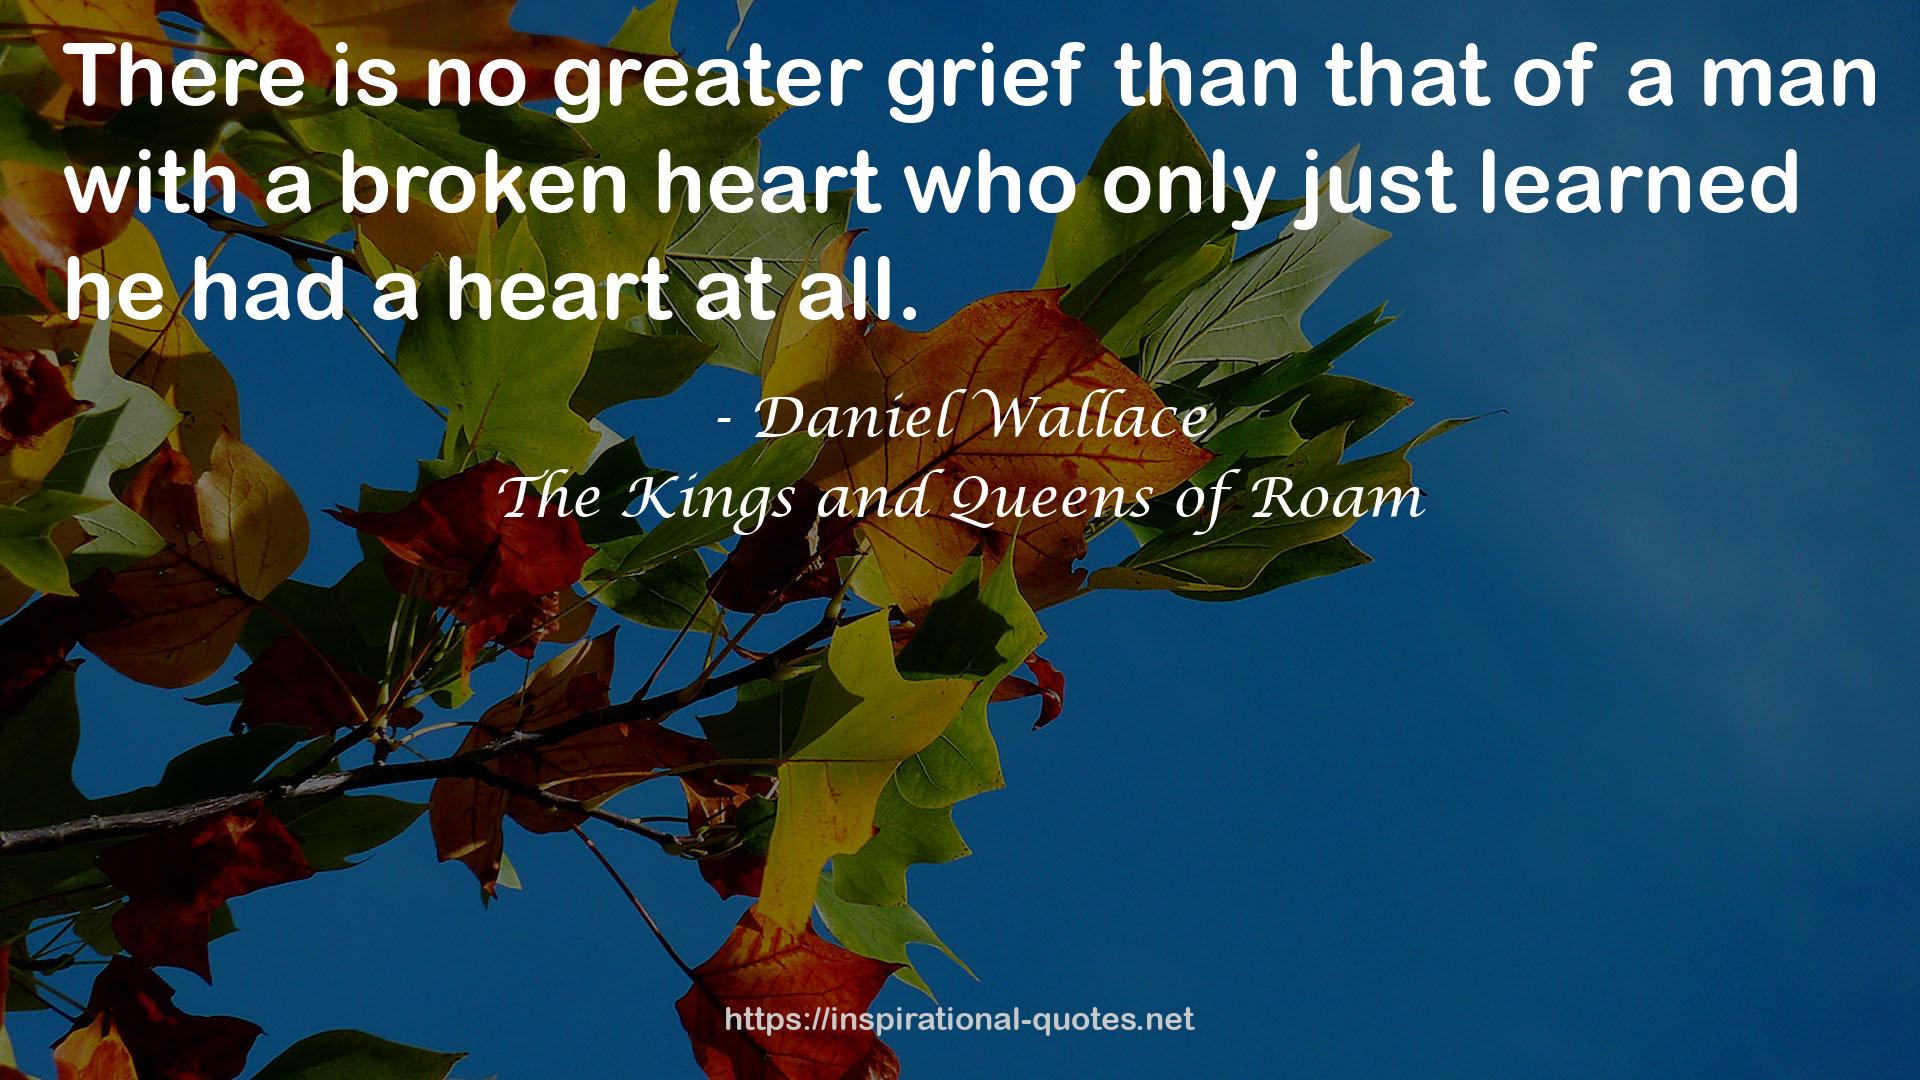 Daniel Wallace QUOTES